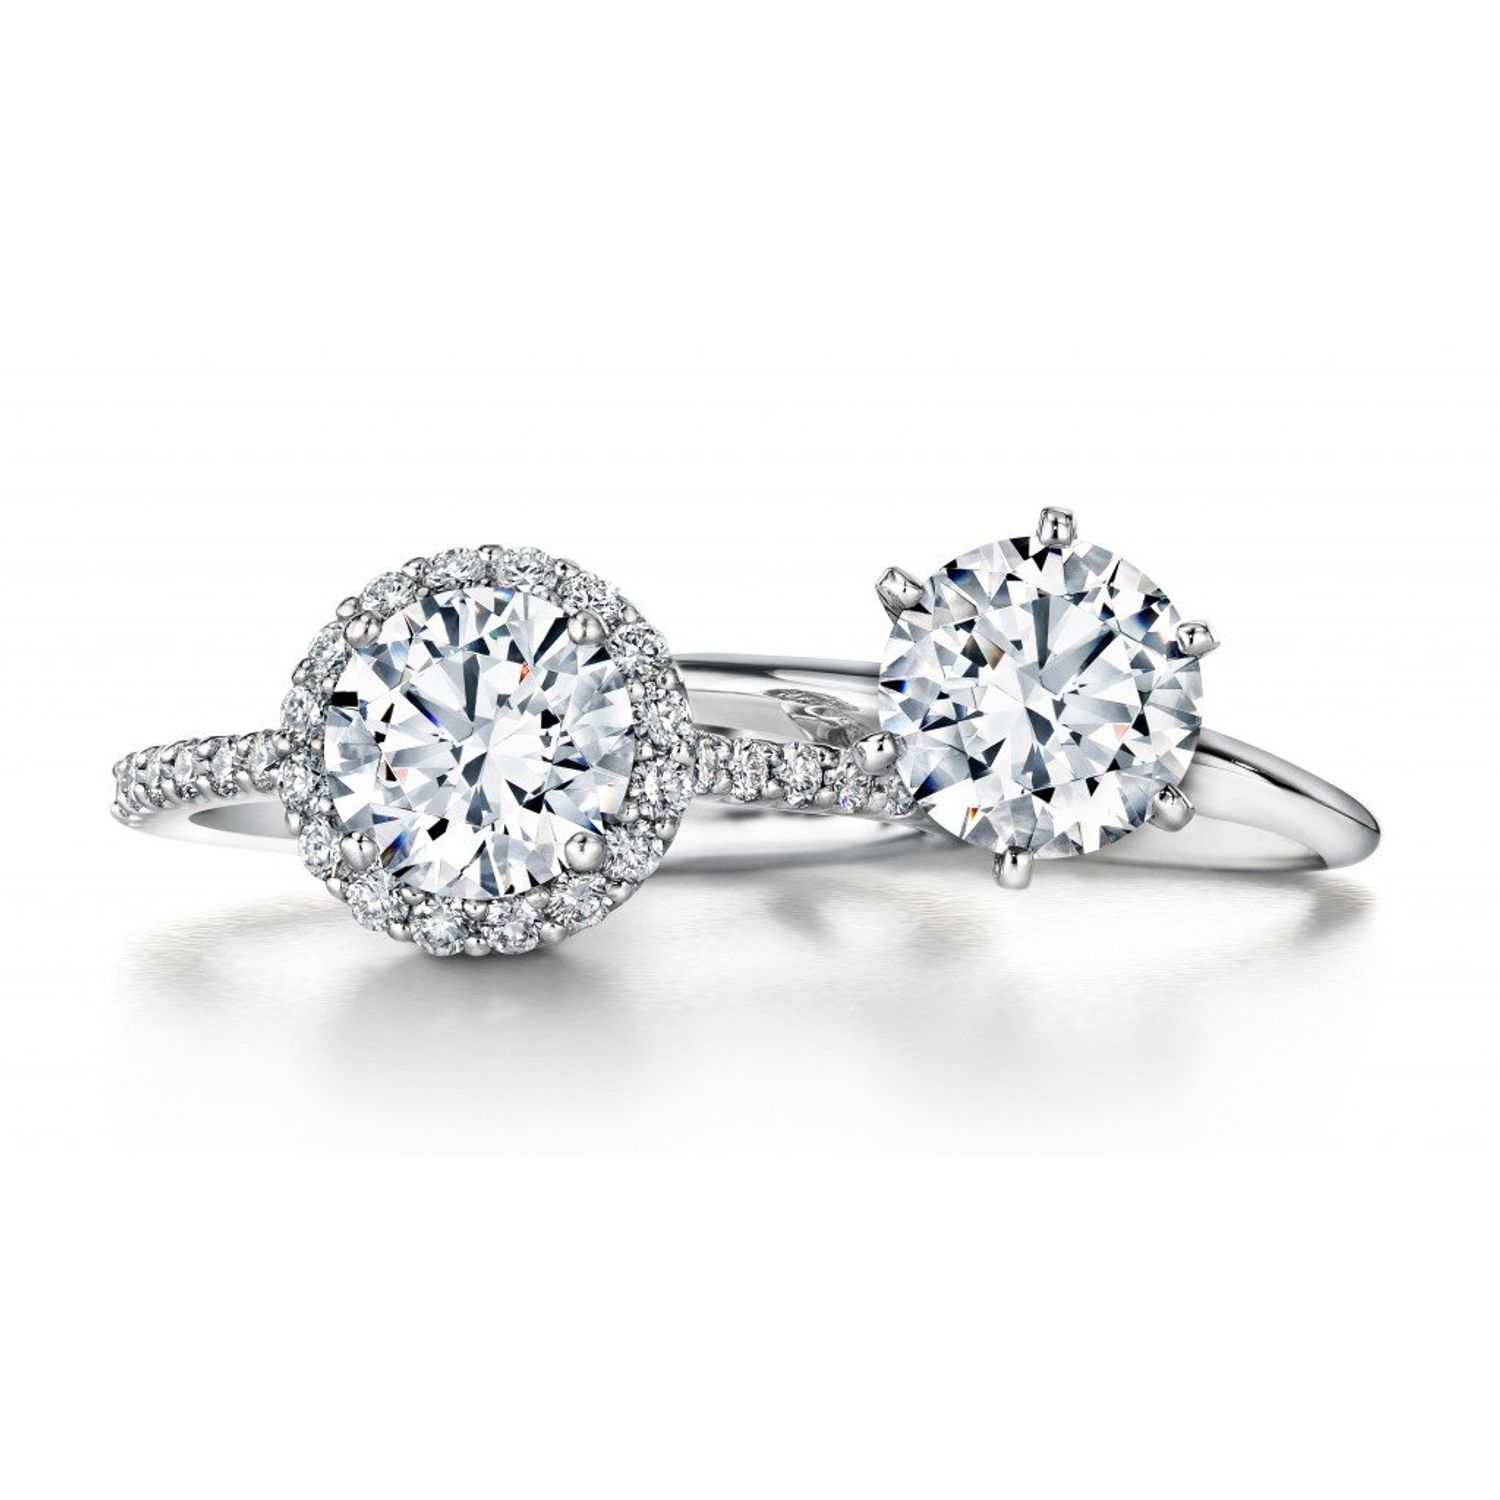 2019 engagement ring trends